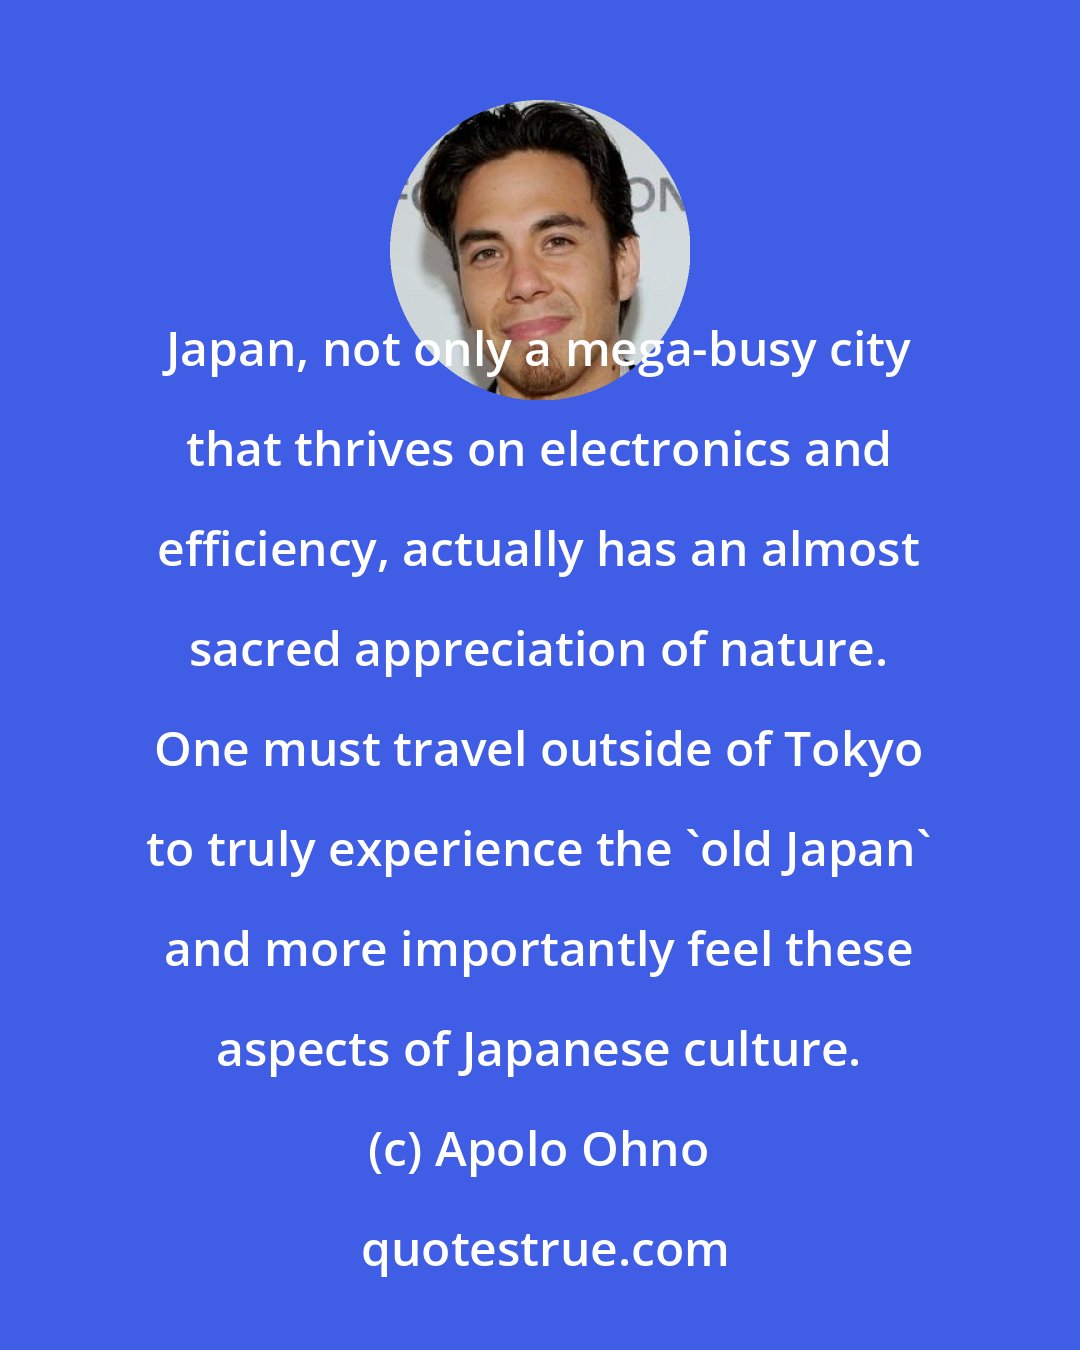 Apolo Ohno: Japan, not only a mega-busy city that thrives on electronics and efficiency, actually has an almost sacred appreciation of nature. One must travel outside of Tokyo to truly experience the 'old Japan' and more importantly feel these aspects of Japanese culture.